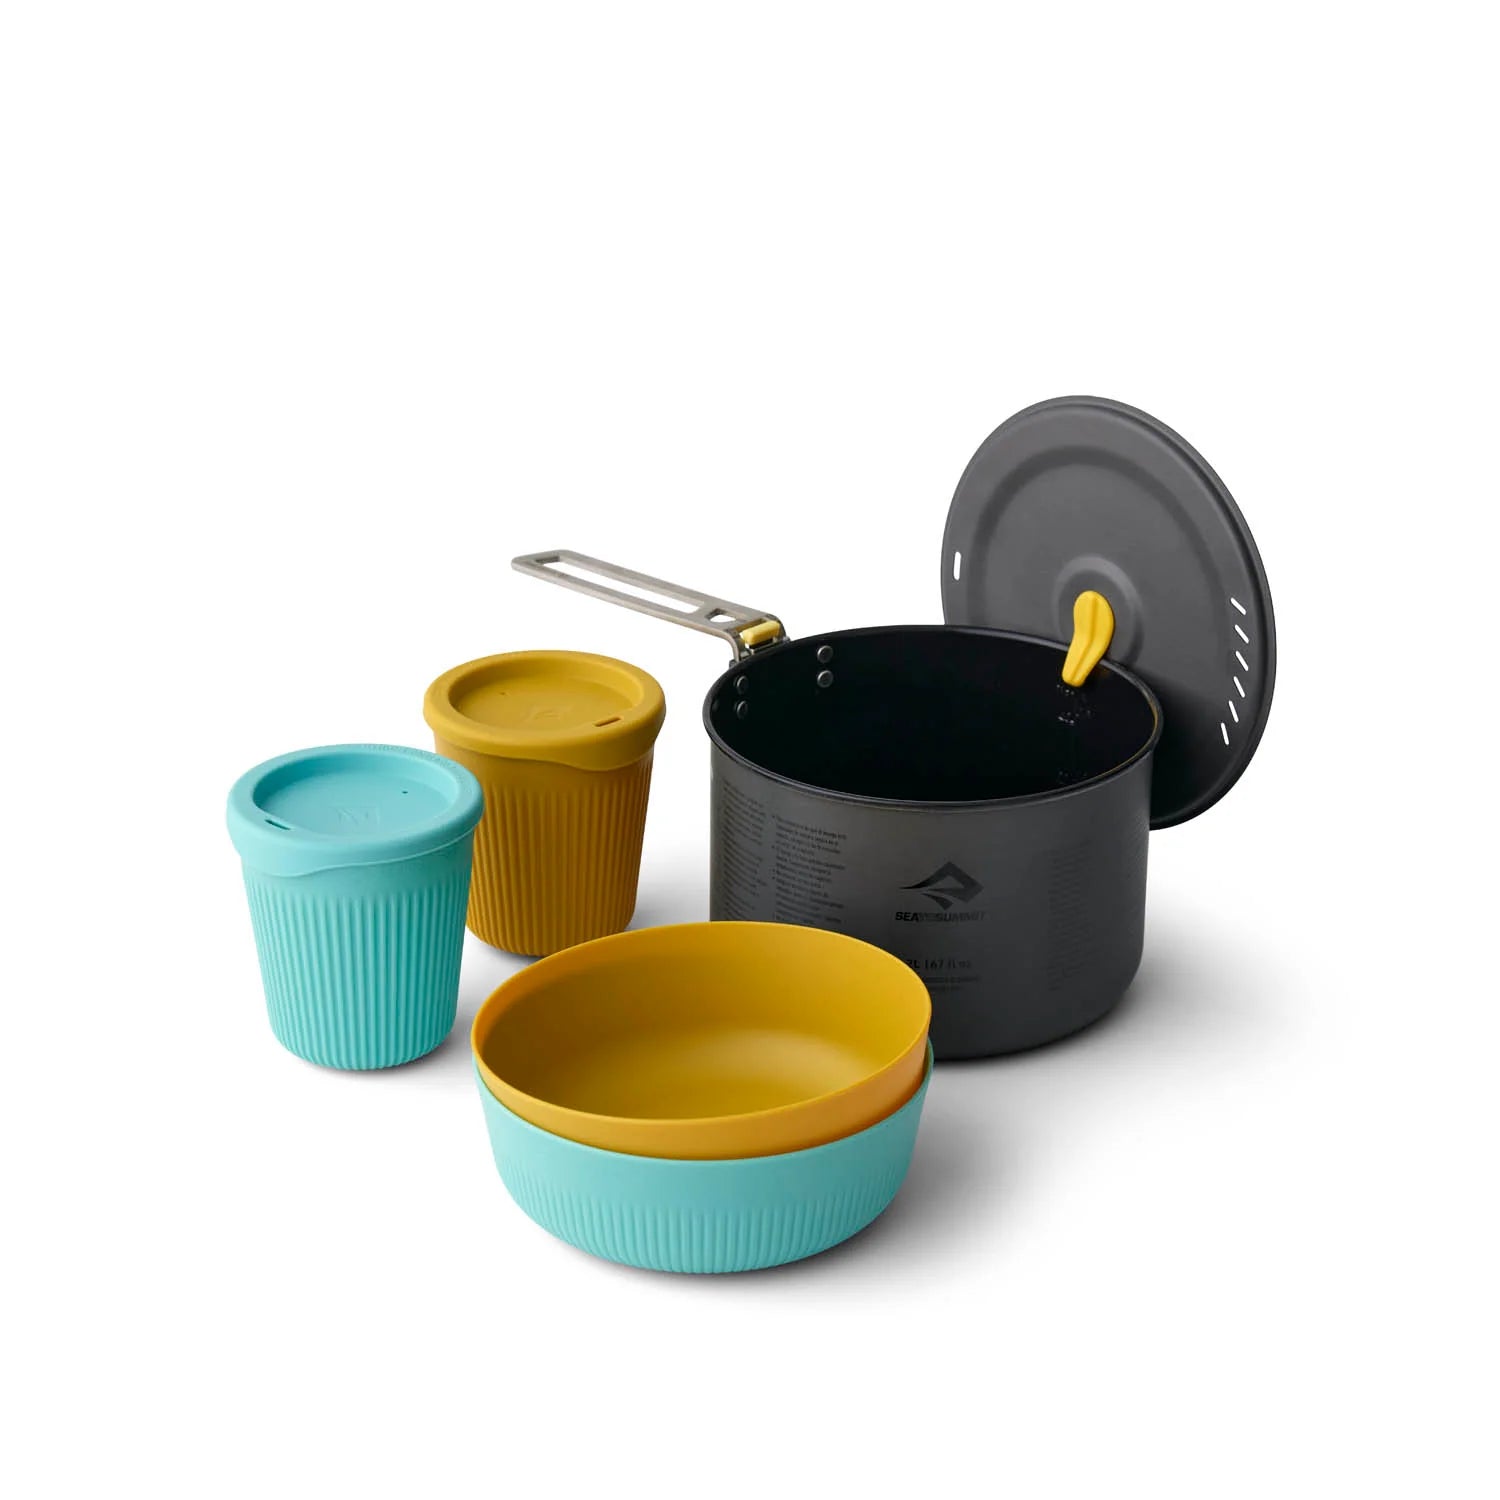 Sea to Summit Frontier UL One Pot Cook Set - 5 Piece -  - Mansfield Hunting & Fishing - Products to prepare for Corona Virus